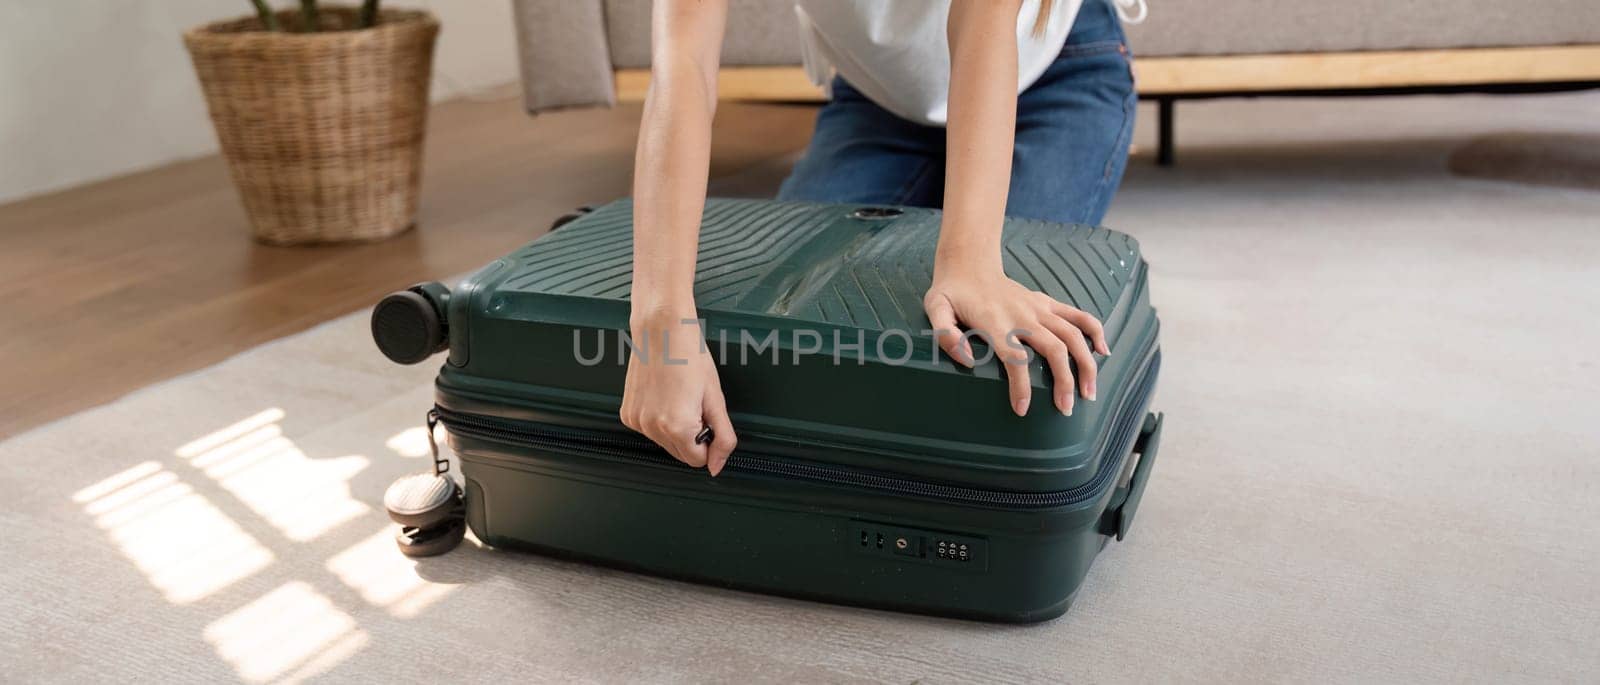 Woman and suitcase for travel summertime vacation packing clothing. relax and getaway preparation.